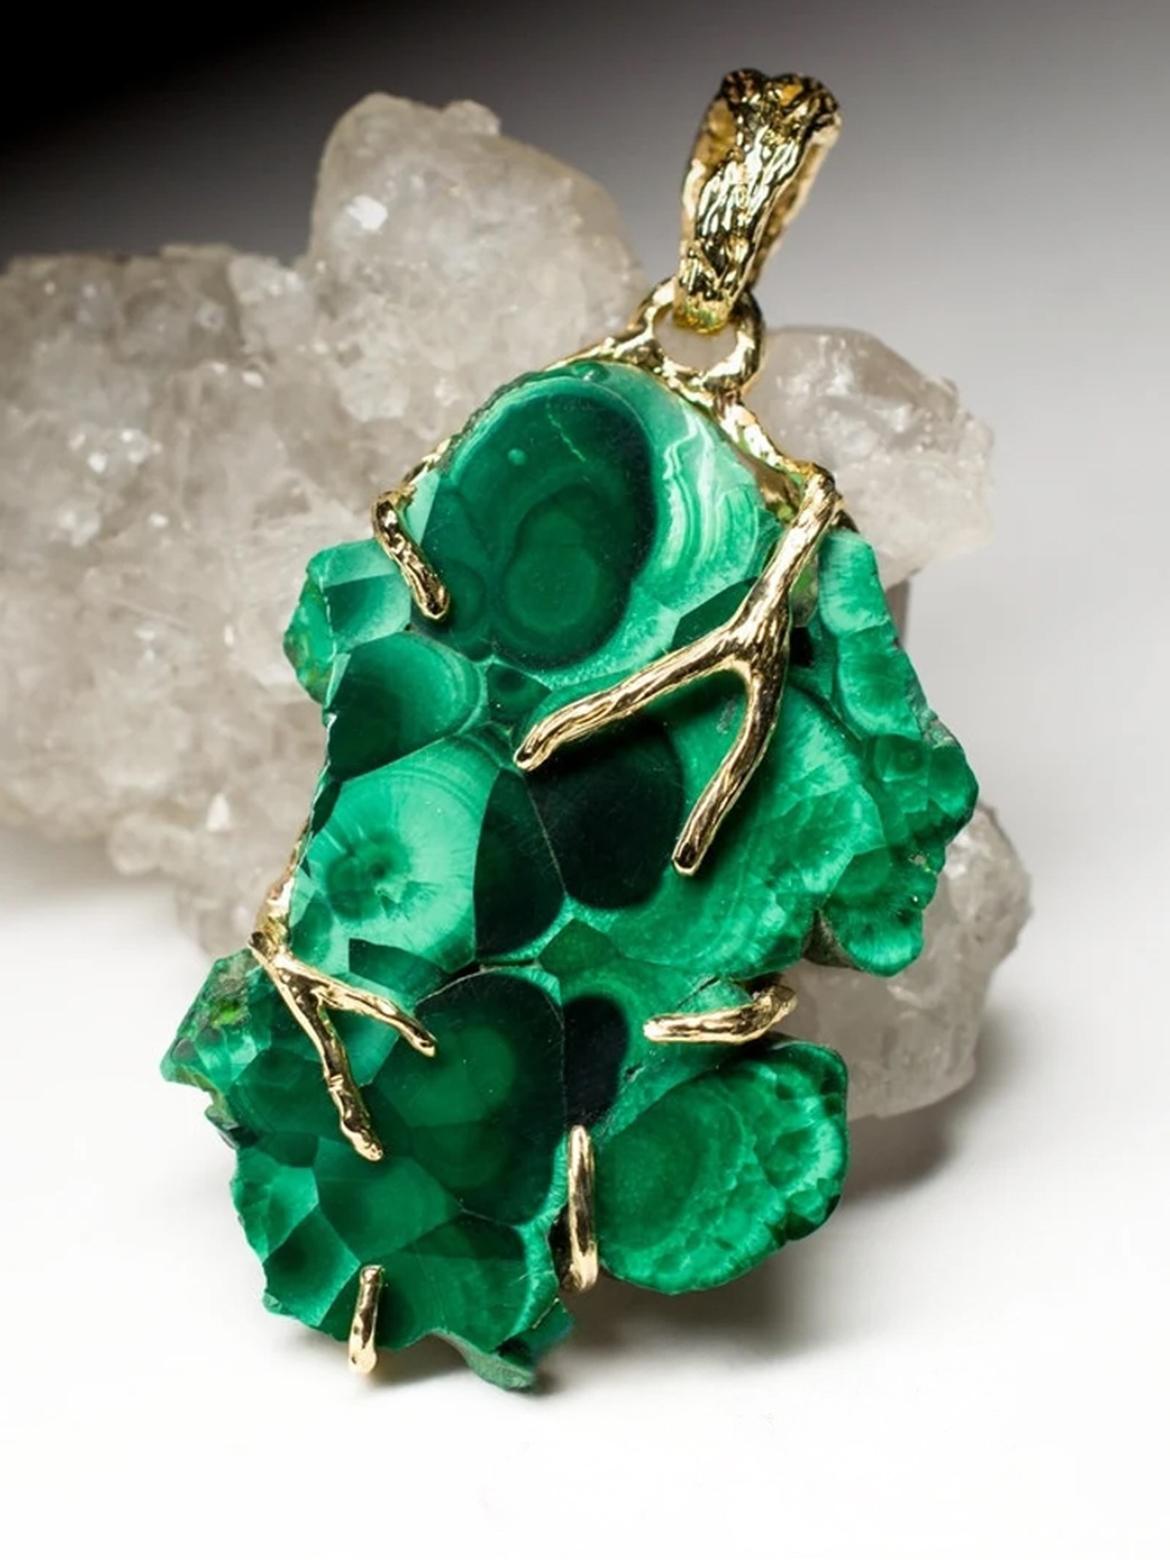 14K yellow gold pendant with slice of rare natural Ural Malachite

pendant weight - 6.19 grams

stone weight - 20.60 carats

stone measurements - 0.08 x 0.86 x 1.25 in / 2 х 22 х 32 mm

Roots collection